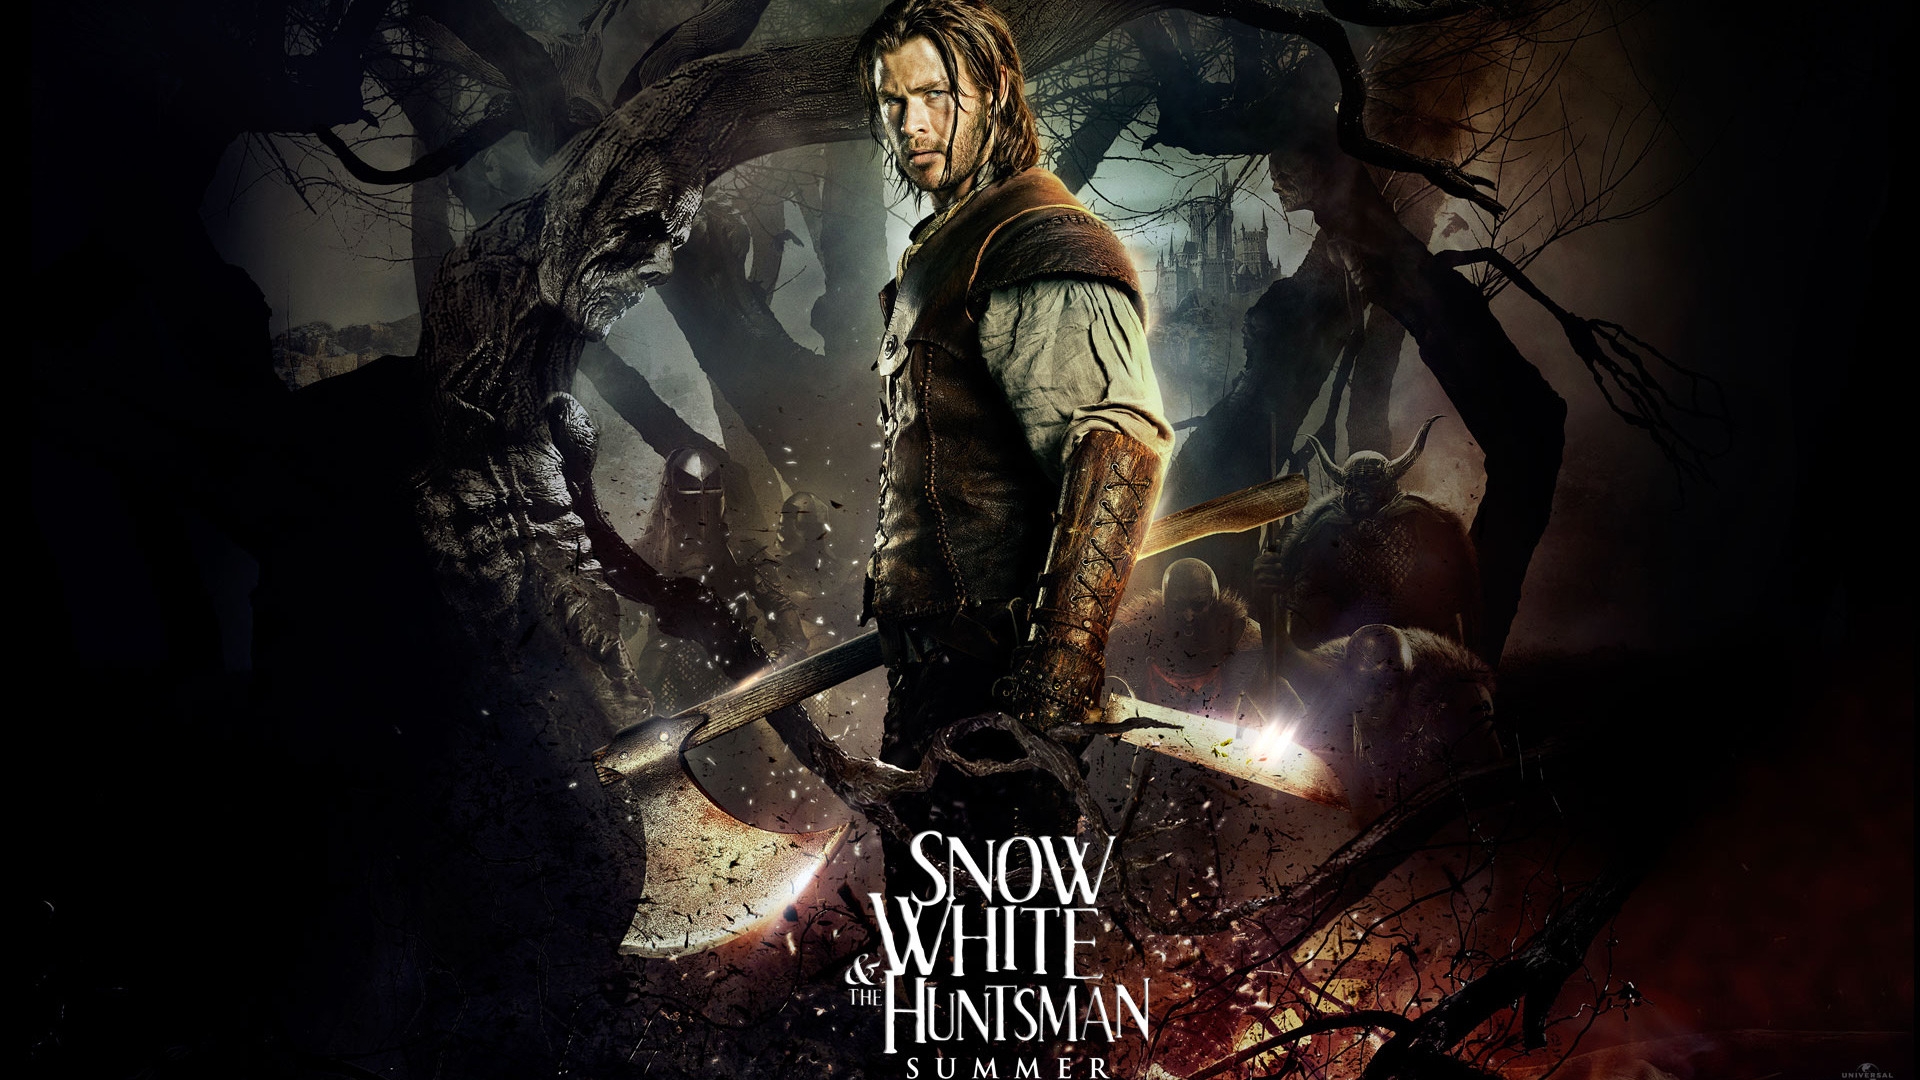 The Huntsman in Snow White Movie 2012 for 1920 x 1080 HDTV 1080p resolution